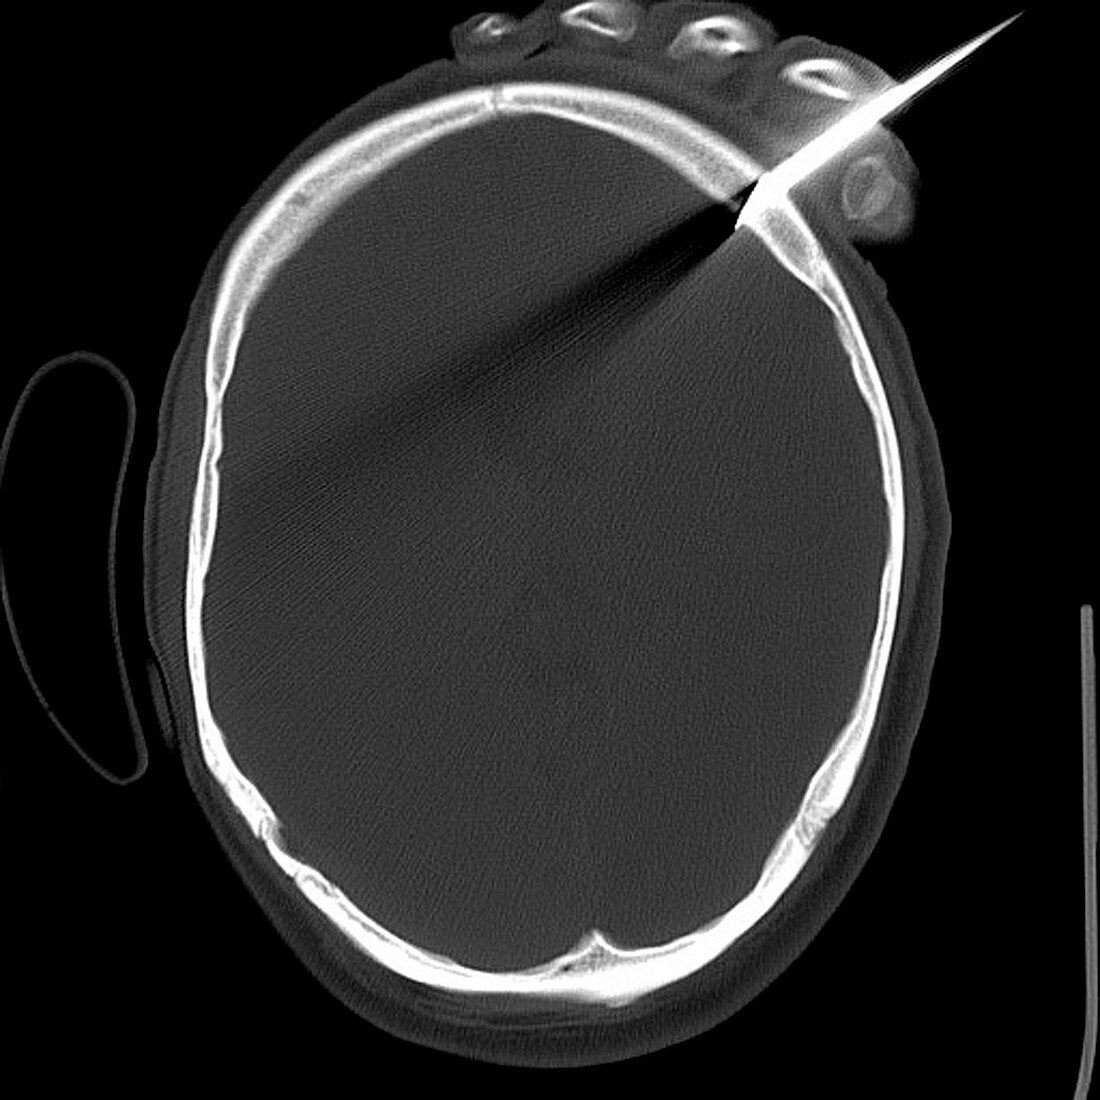 Knife in person's head,X-ray